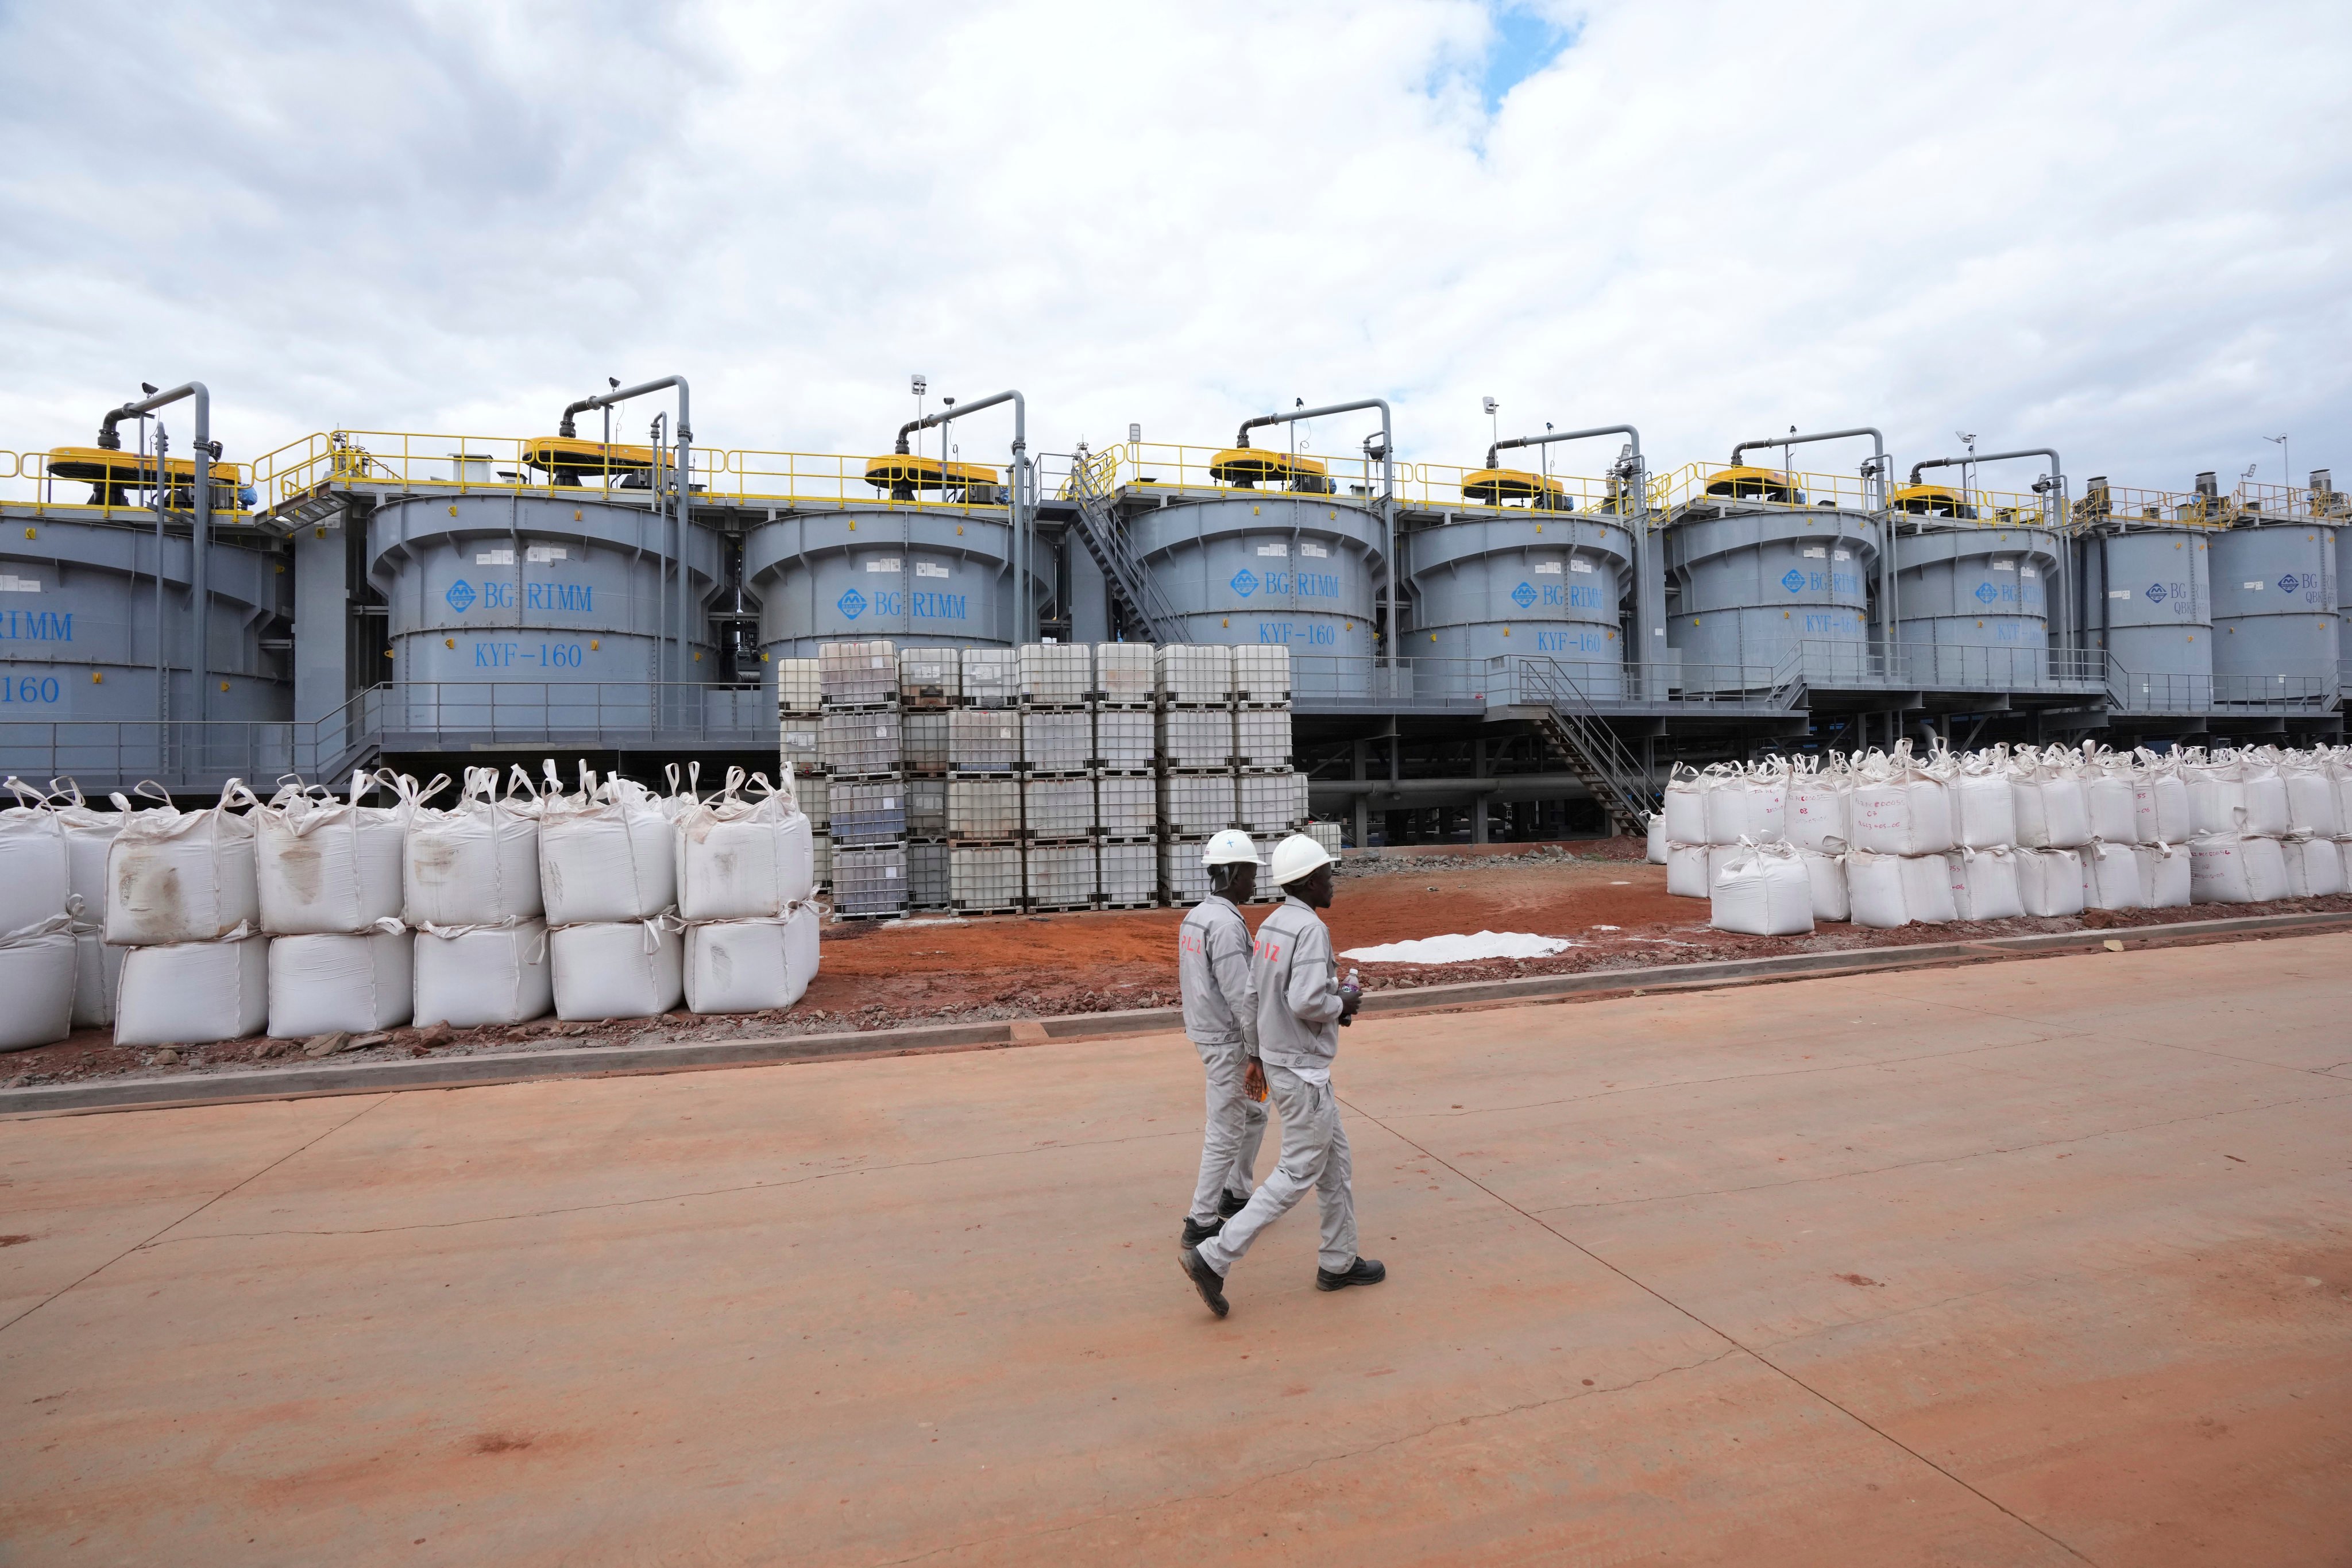 Workers walk past lithium filled bags at a processing plant in Zimbabwe. Raw materials like lithium are taking on heightened importance as the world moves to higher-end technology and electric vehicles. Photo: AP